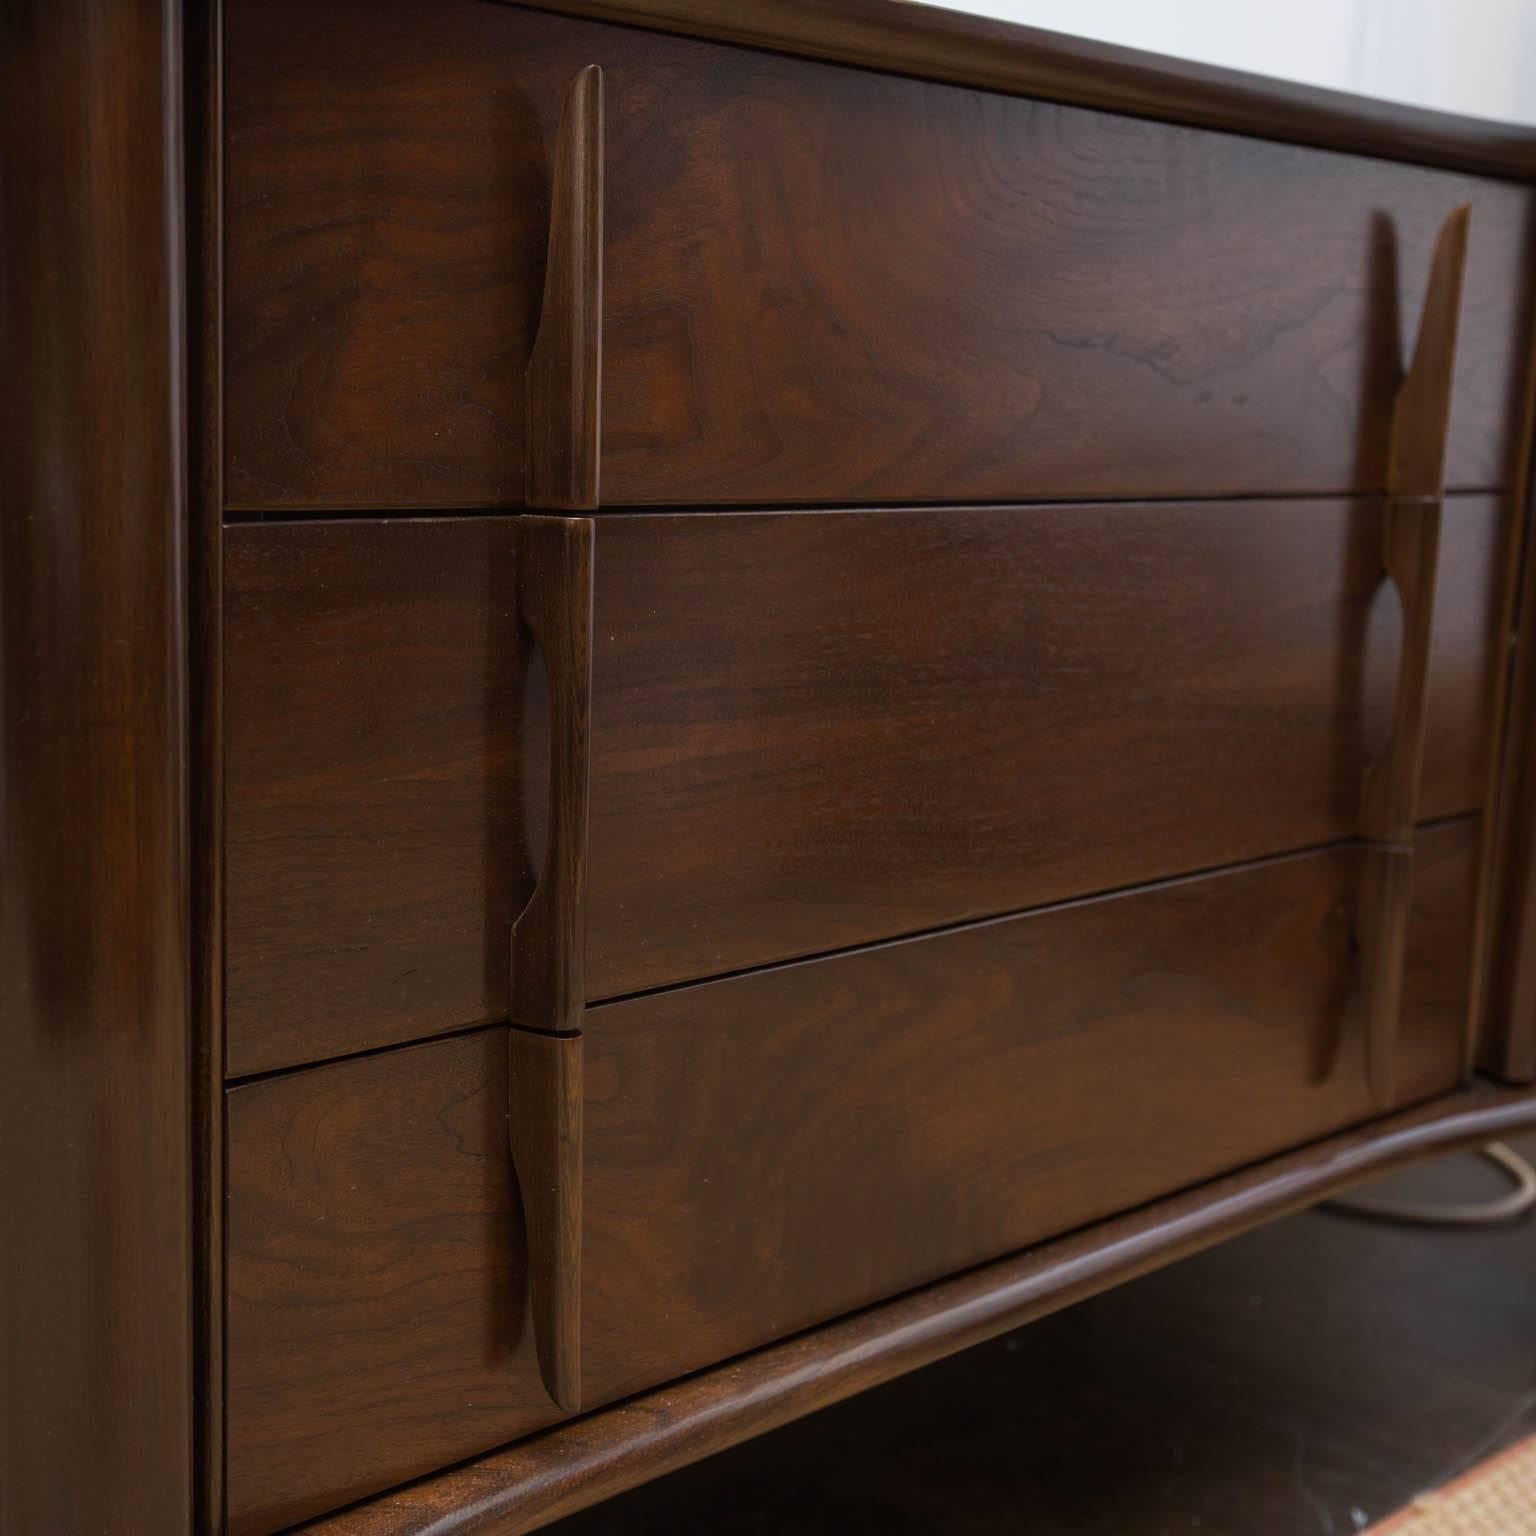 Newly refinished nine-drawer low dresser by United Furniture. Left and right drawers are set behind scalloped doors, while three generous centre drawers feature sculpted handles.